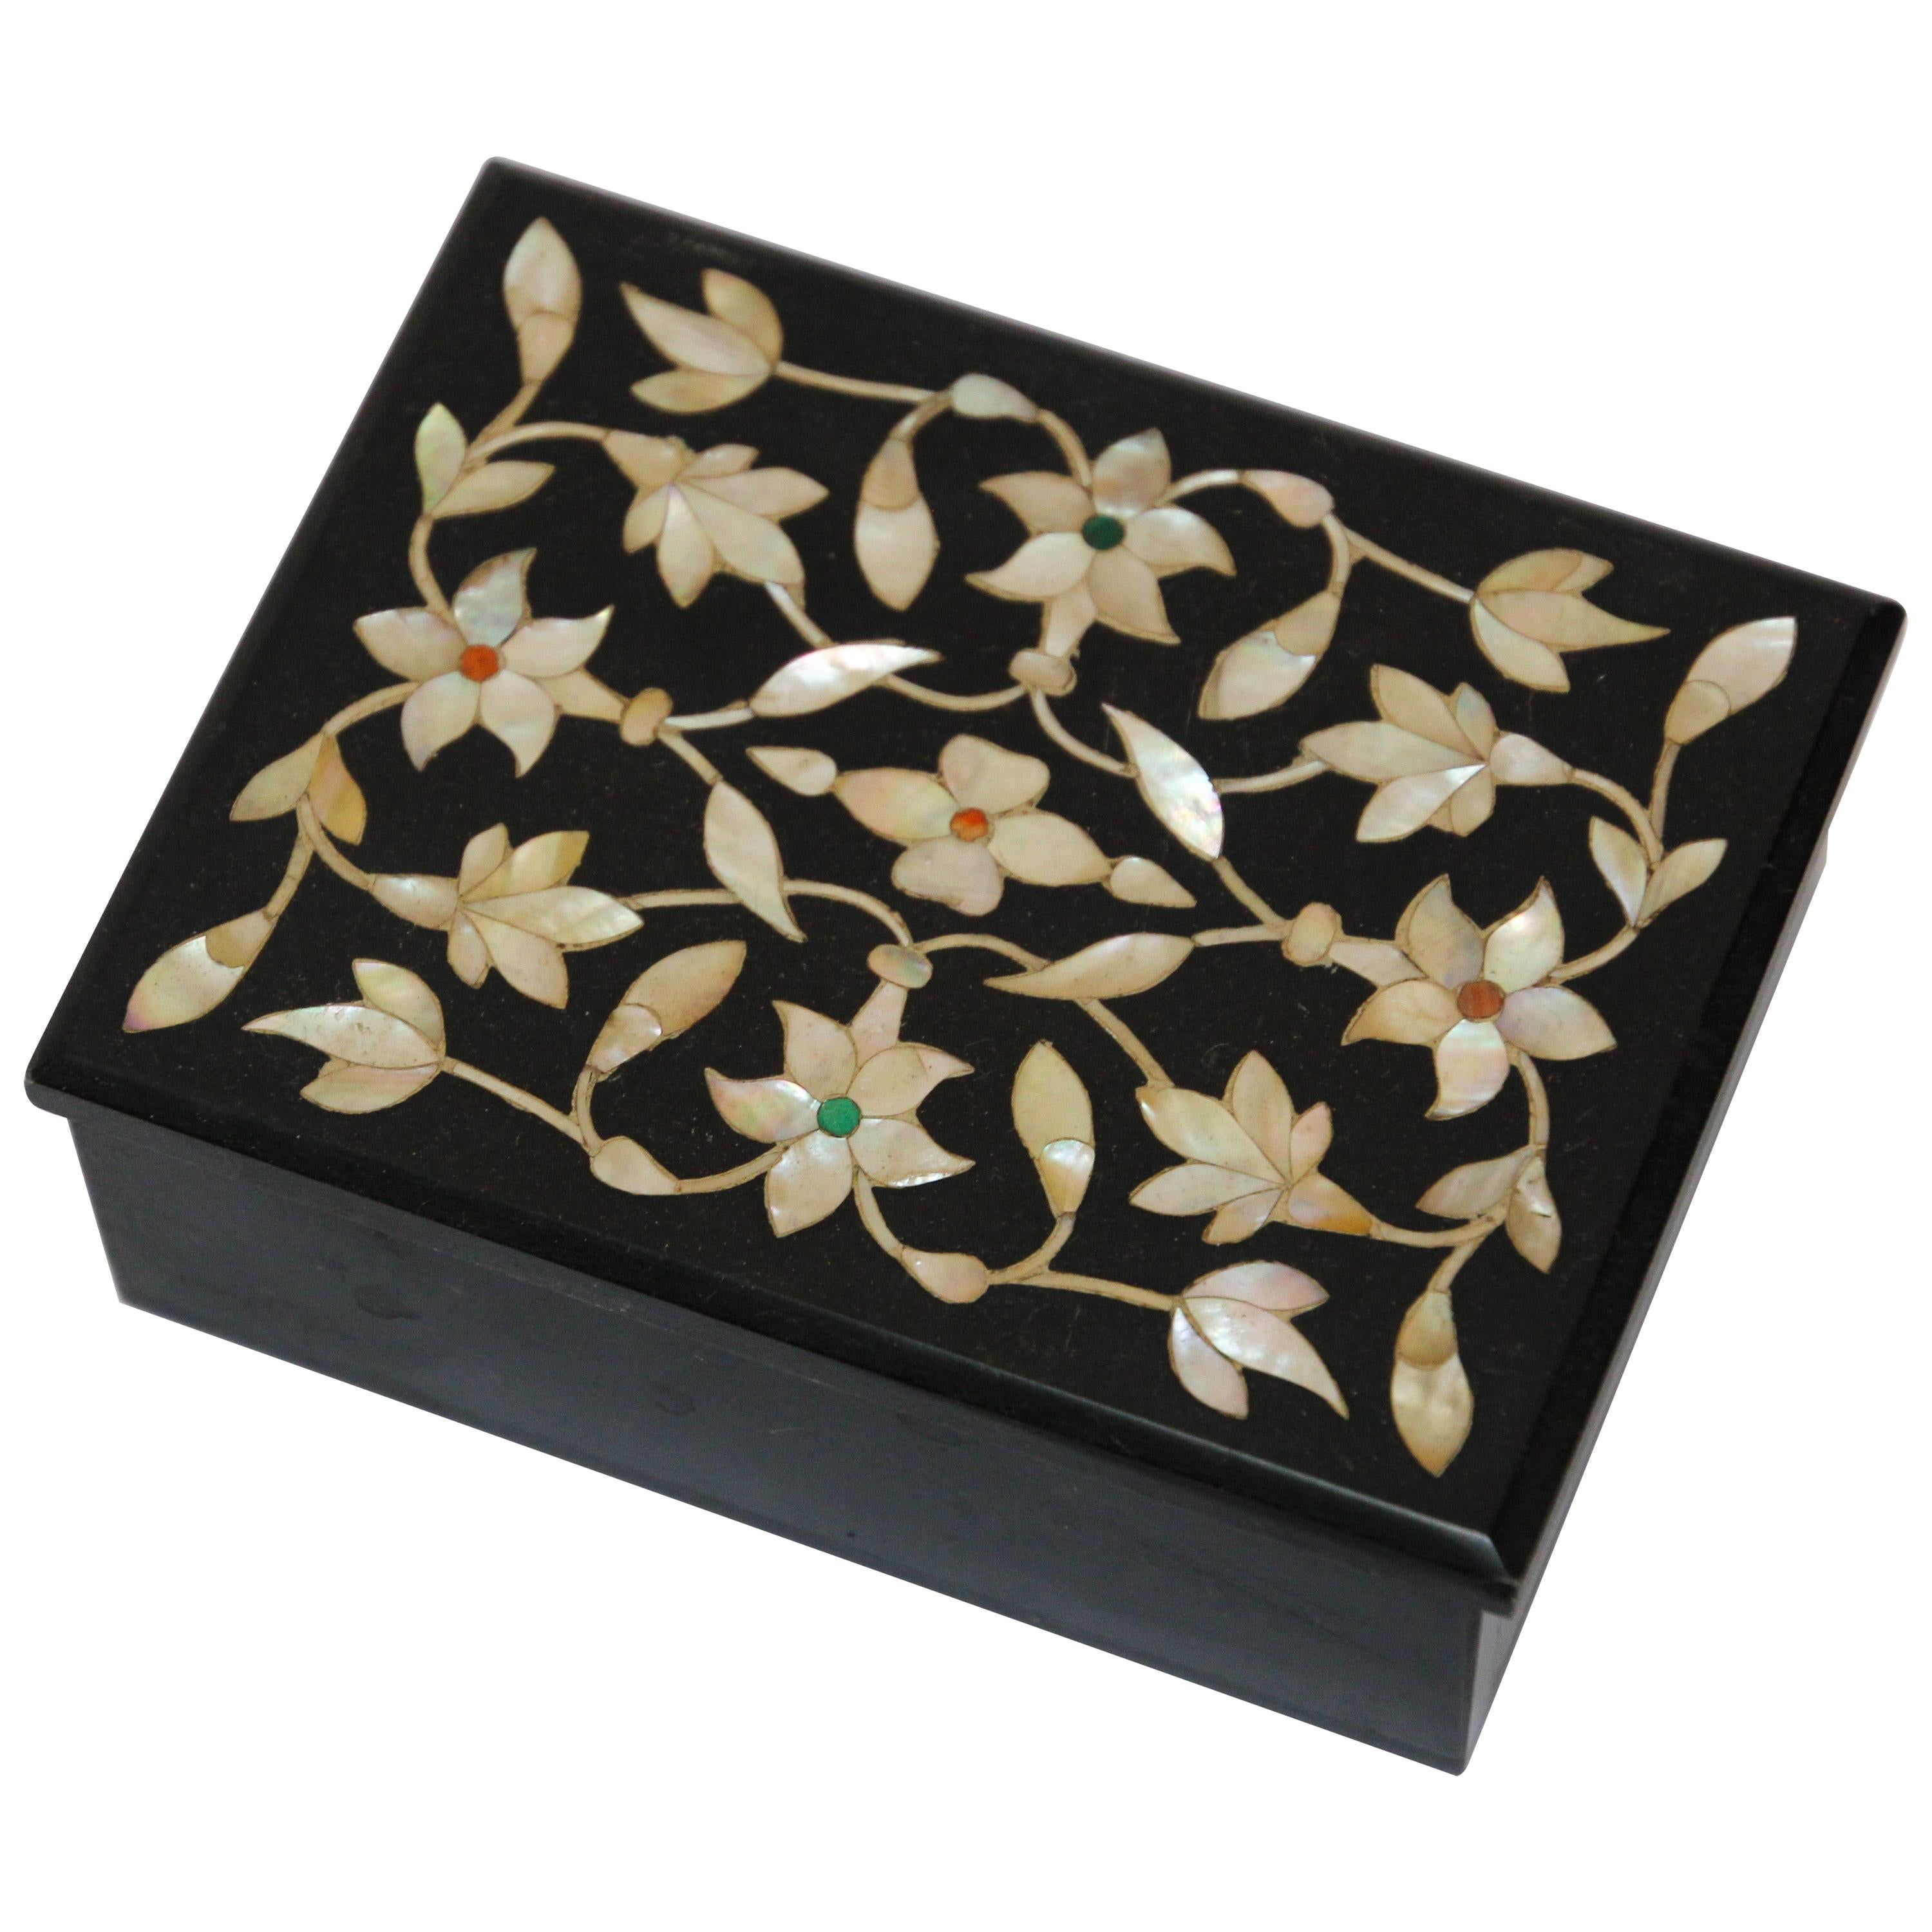 Details about   4" x 3" Marble Trinket Box Semi Precious Stones Floral Handmade Inlay Art Work 